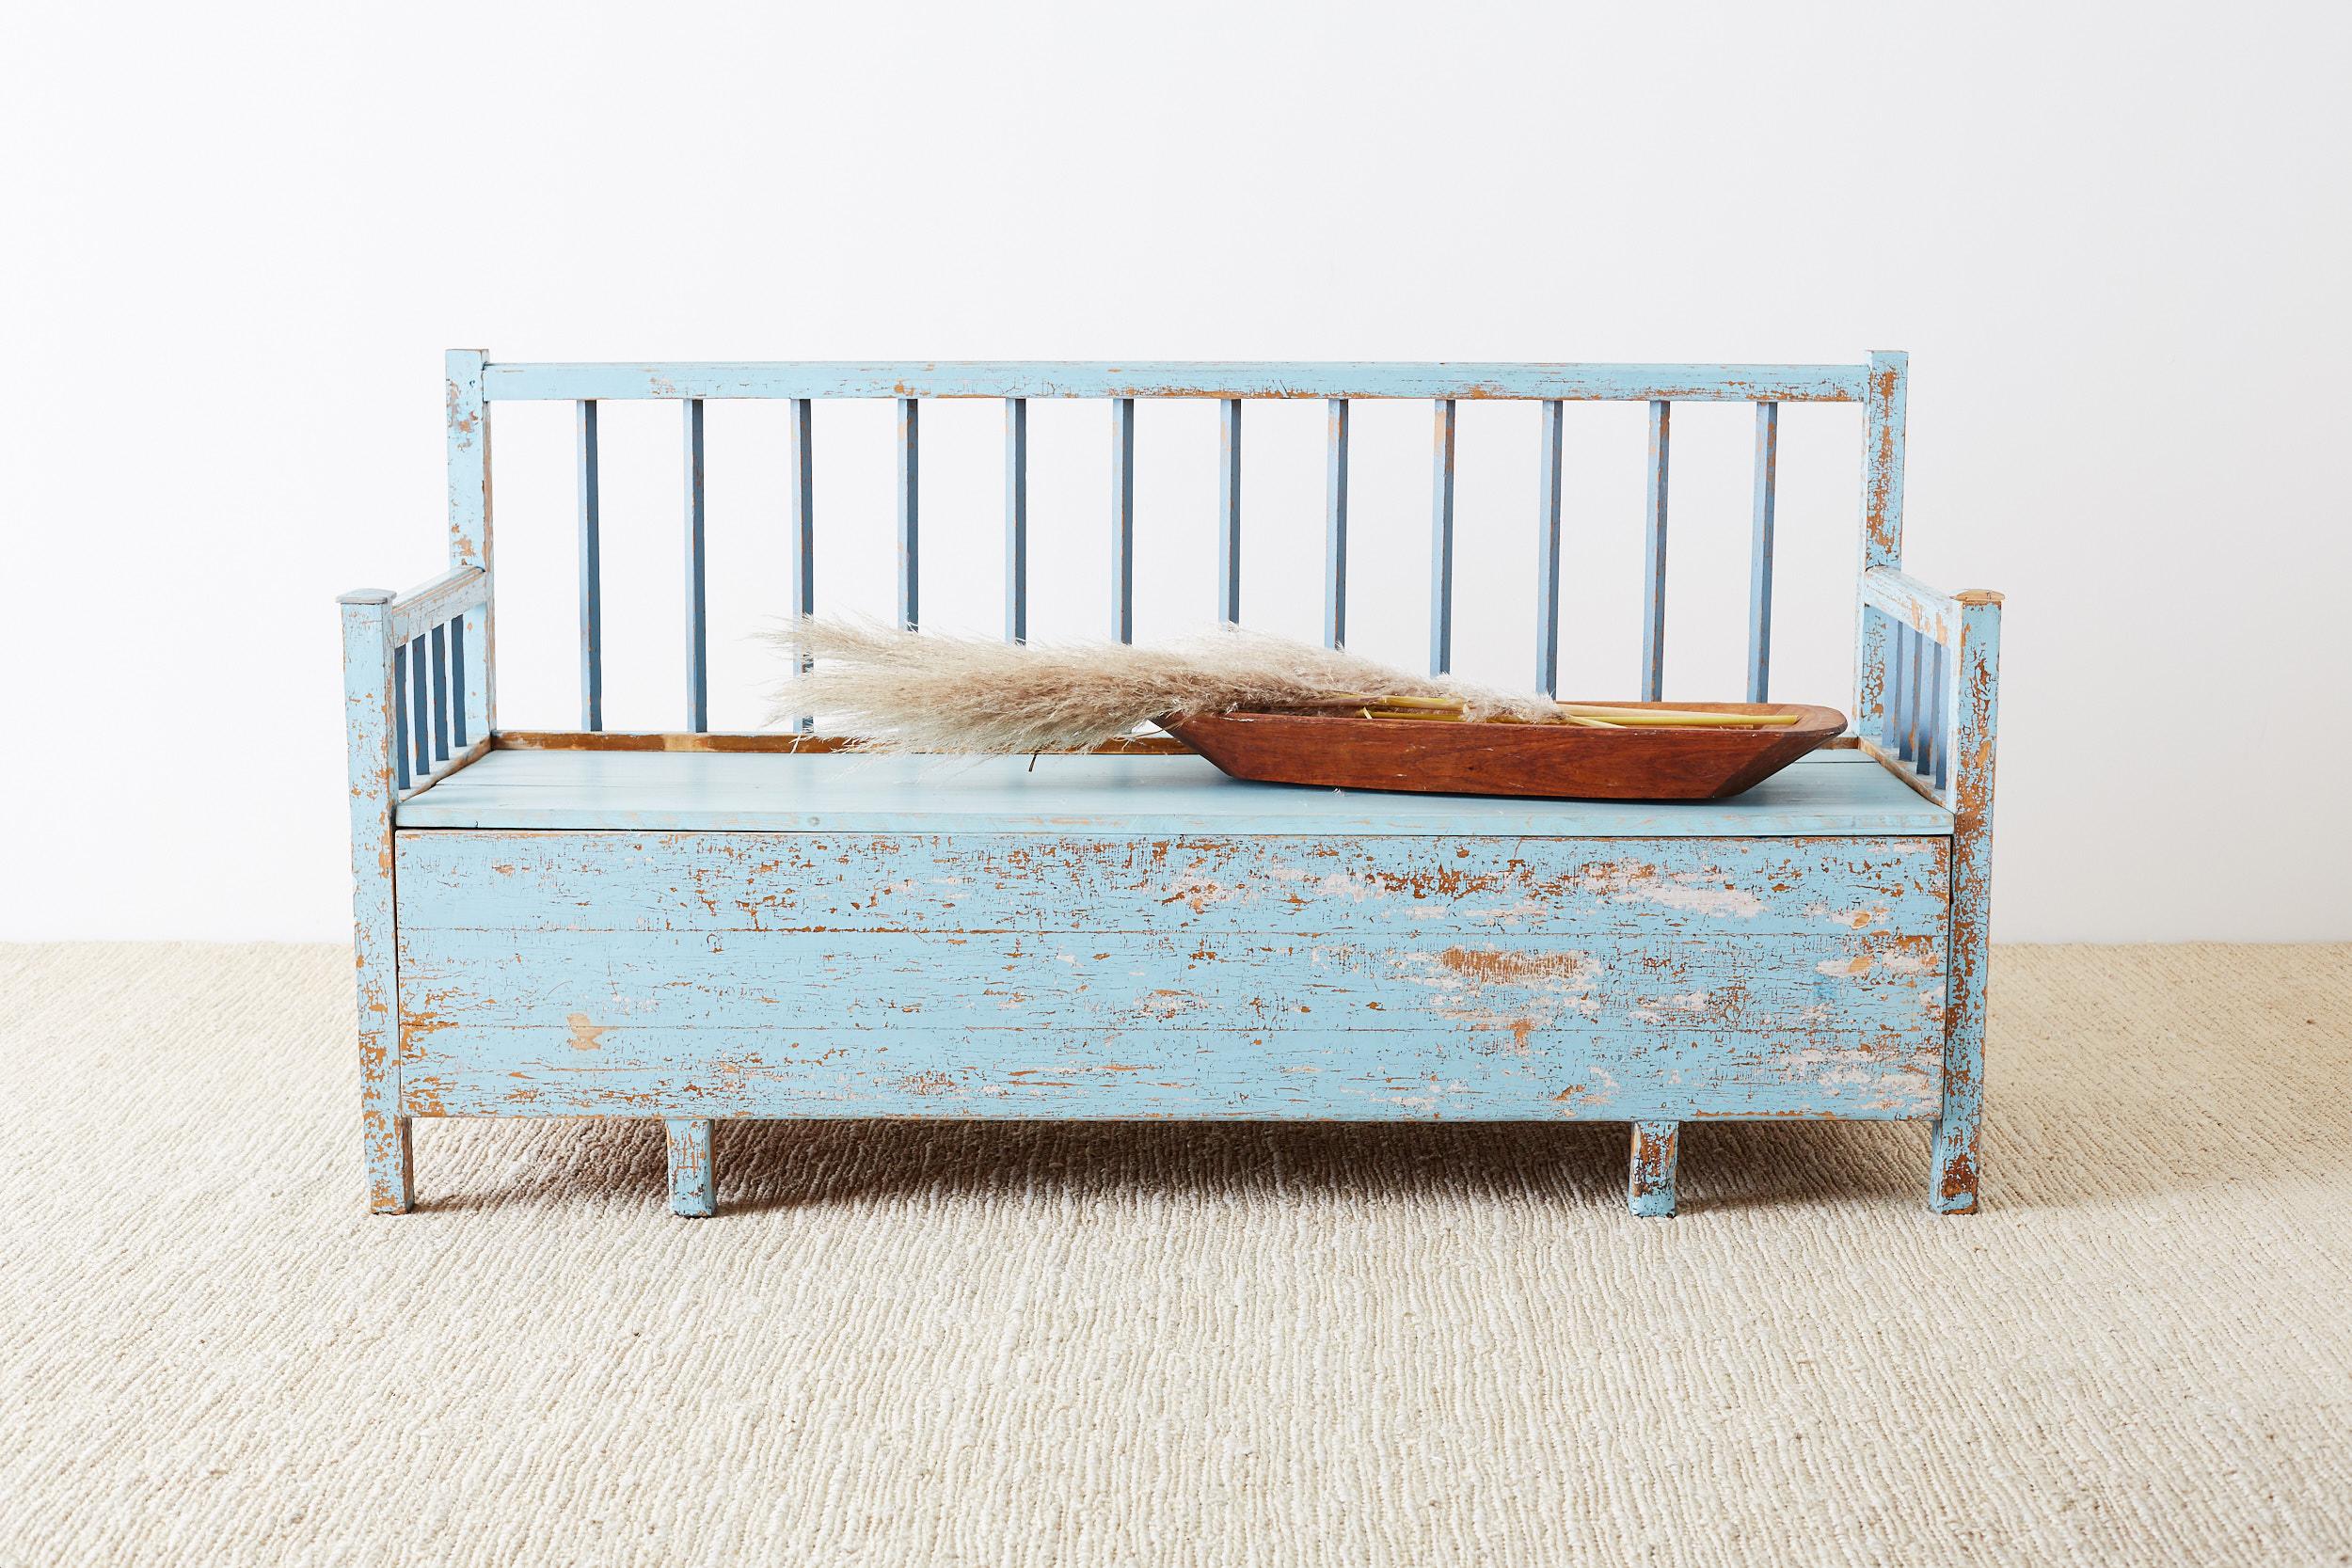 19th century rustic Swedish farmhouse storage bench or settle made of pine. Features a painted finish that is beautifully distressed and faded. The front of the bench seat slides out to reveal a 66 inch long by 21 inch wide storage area. The back